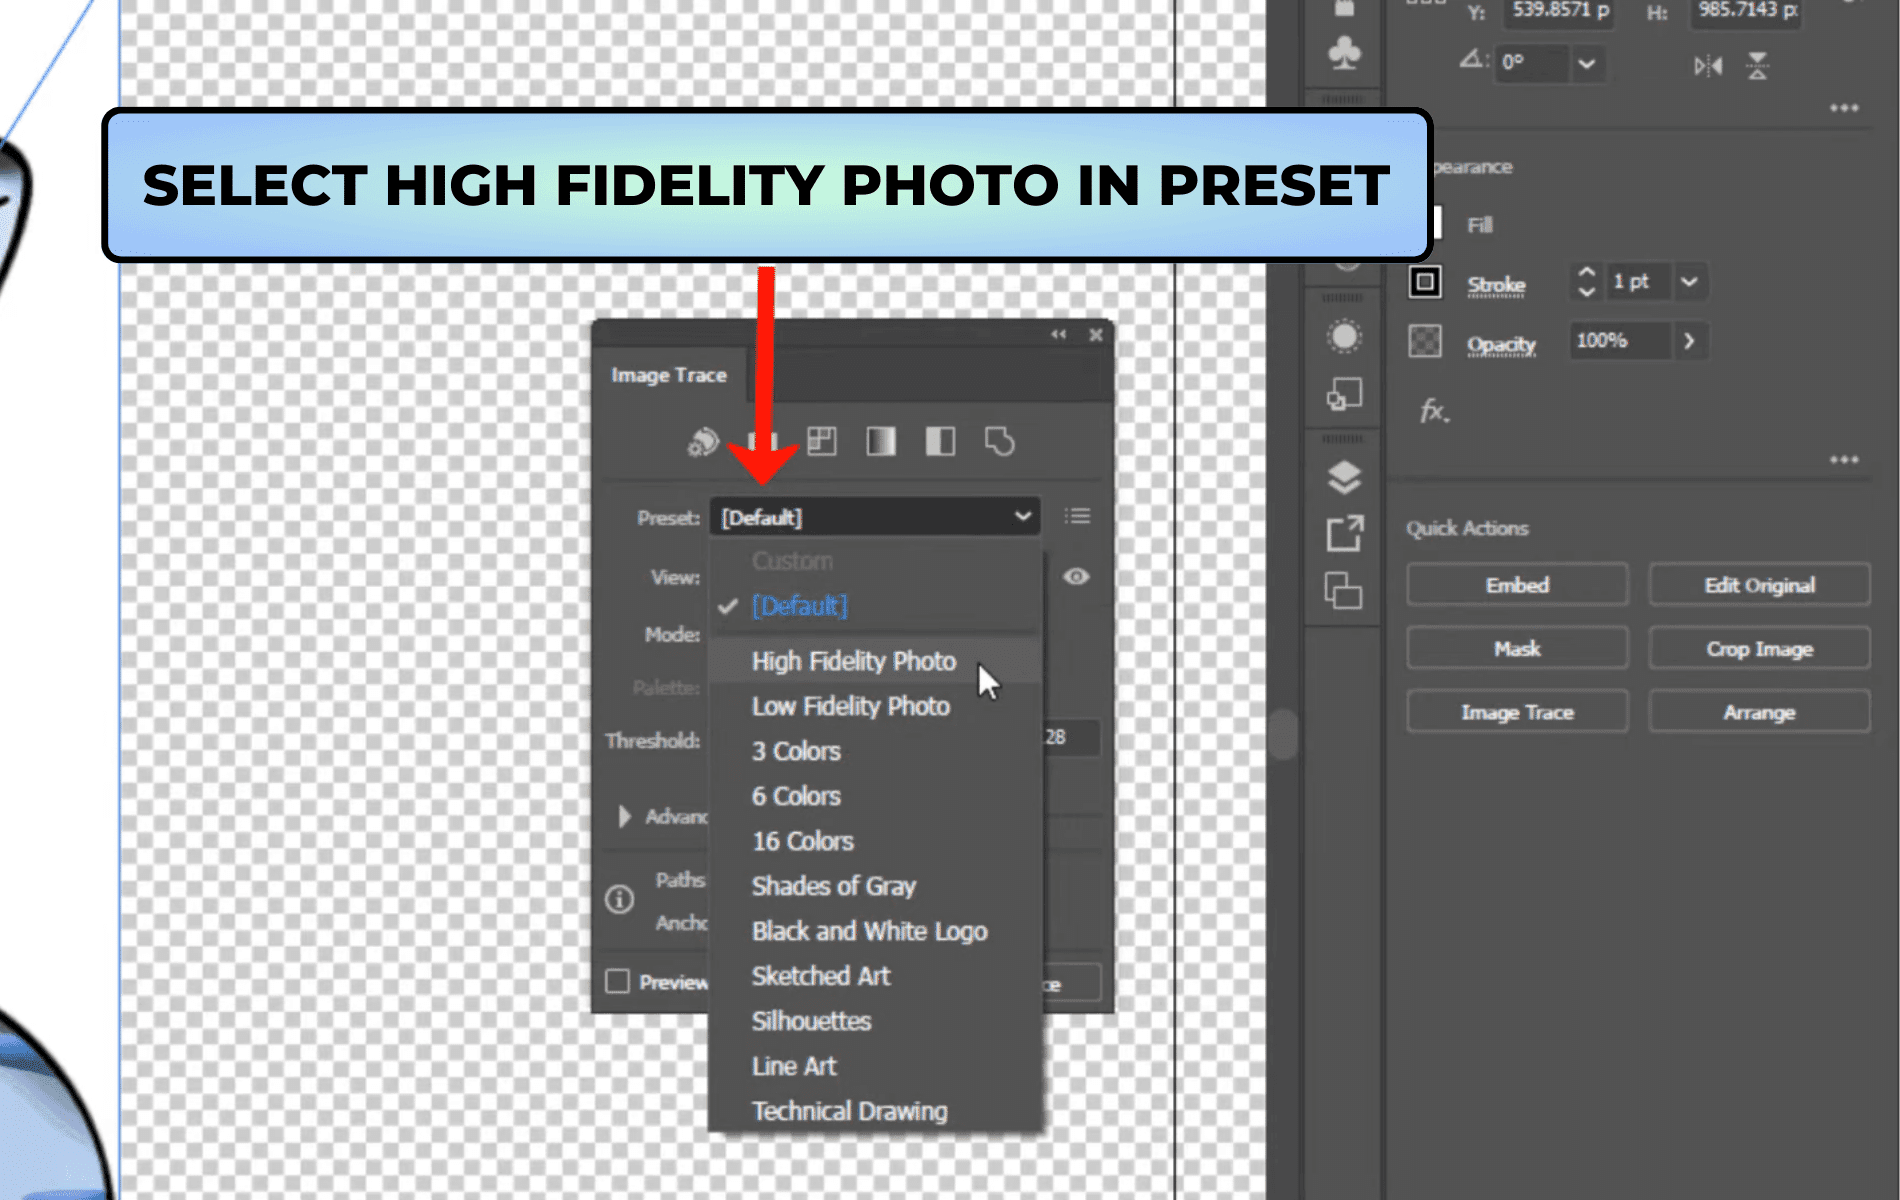 Select High Fidelity Photo in Preset